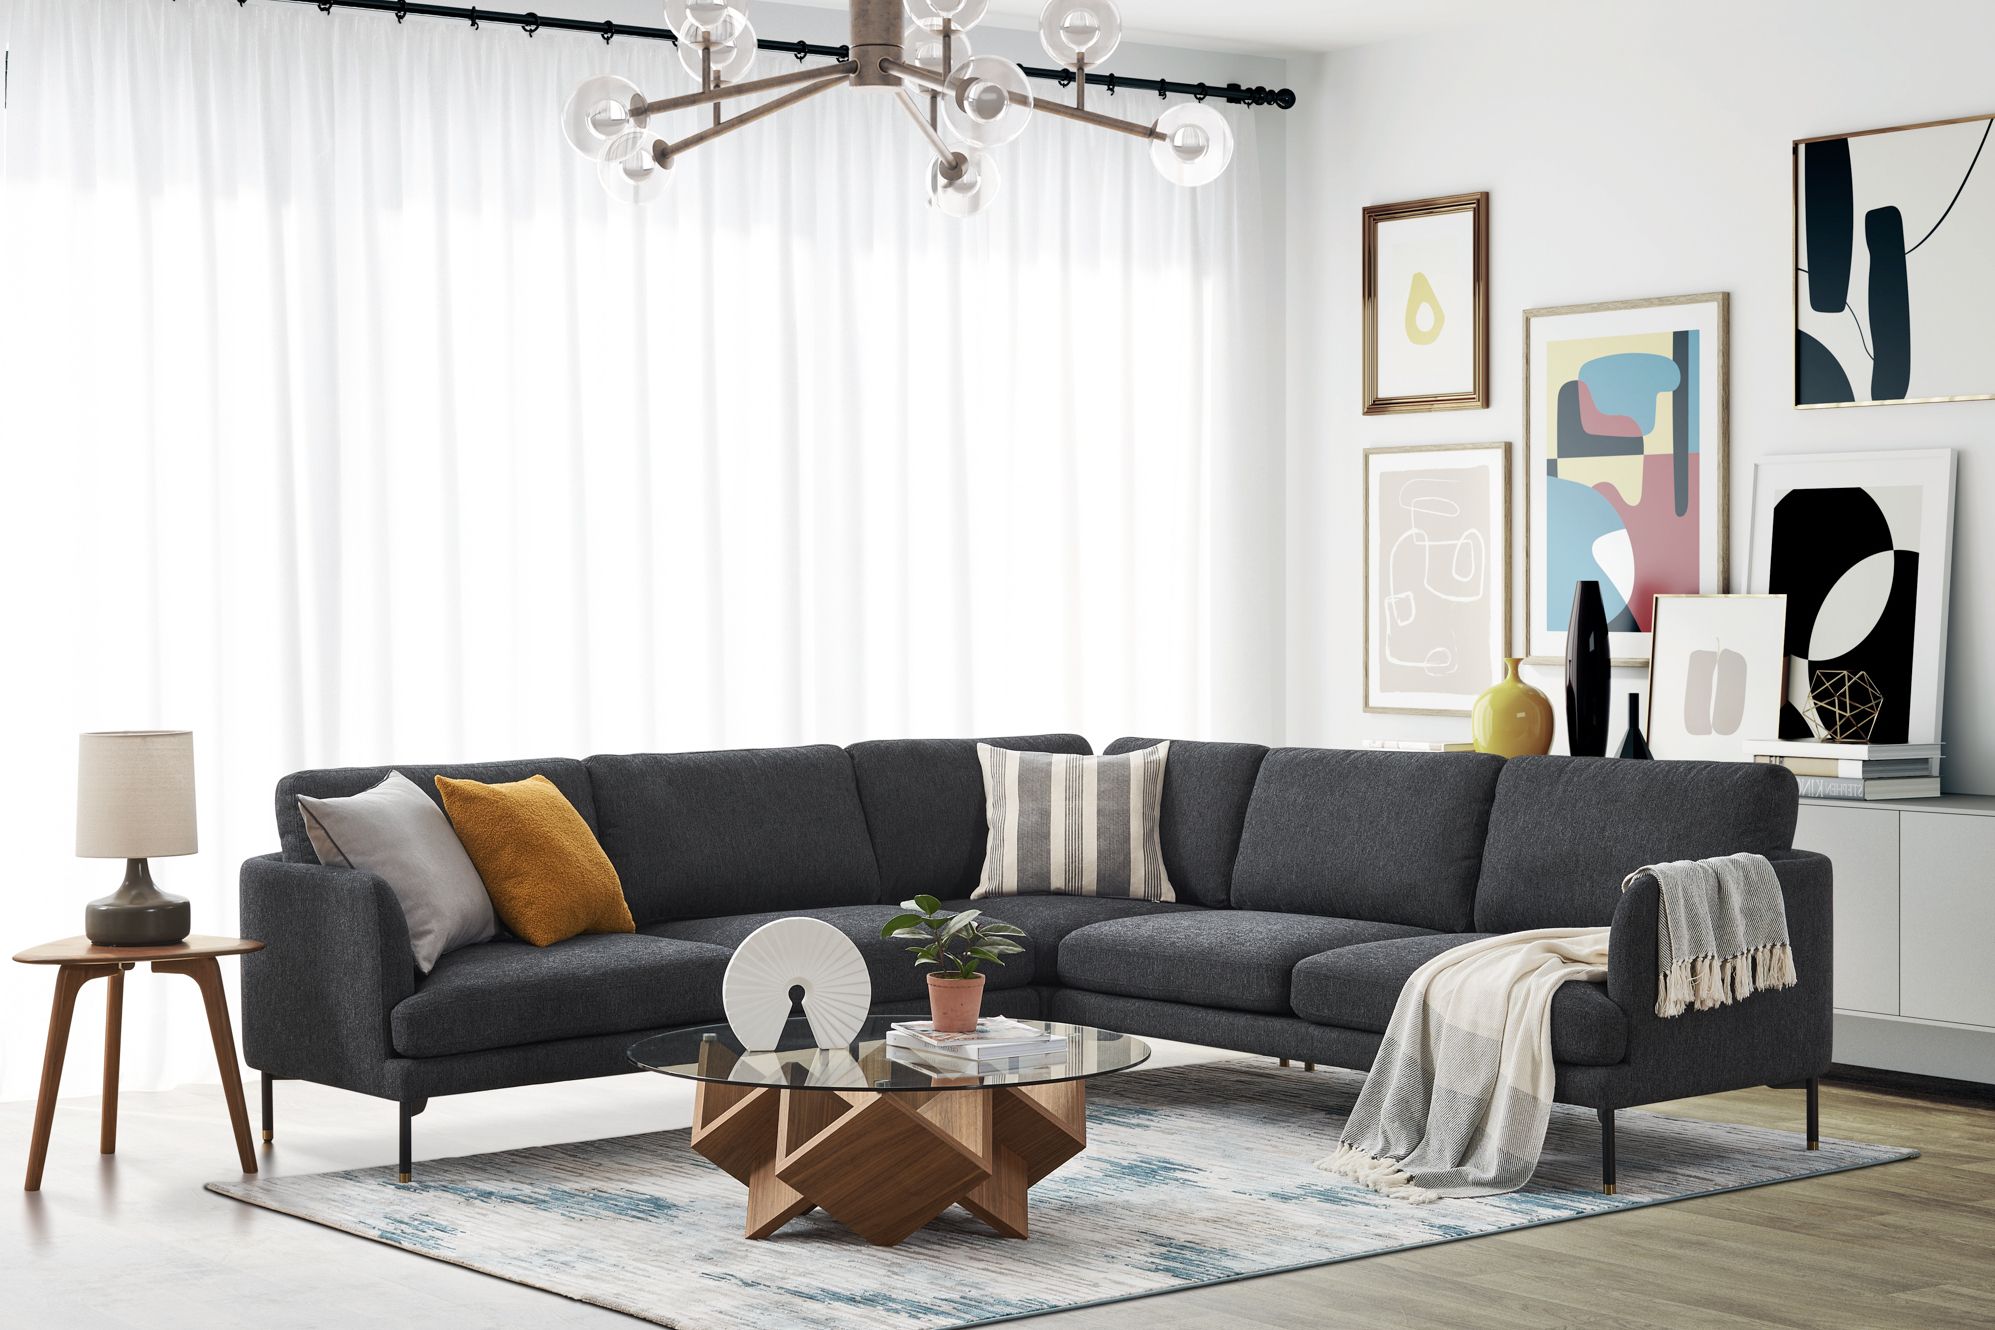 L Shape Sofa For A Small Living Room? | Castlery United States Pertaining To L Shapped Apartment Sofas (Gallery 20 of 20)